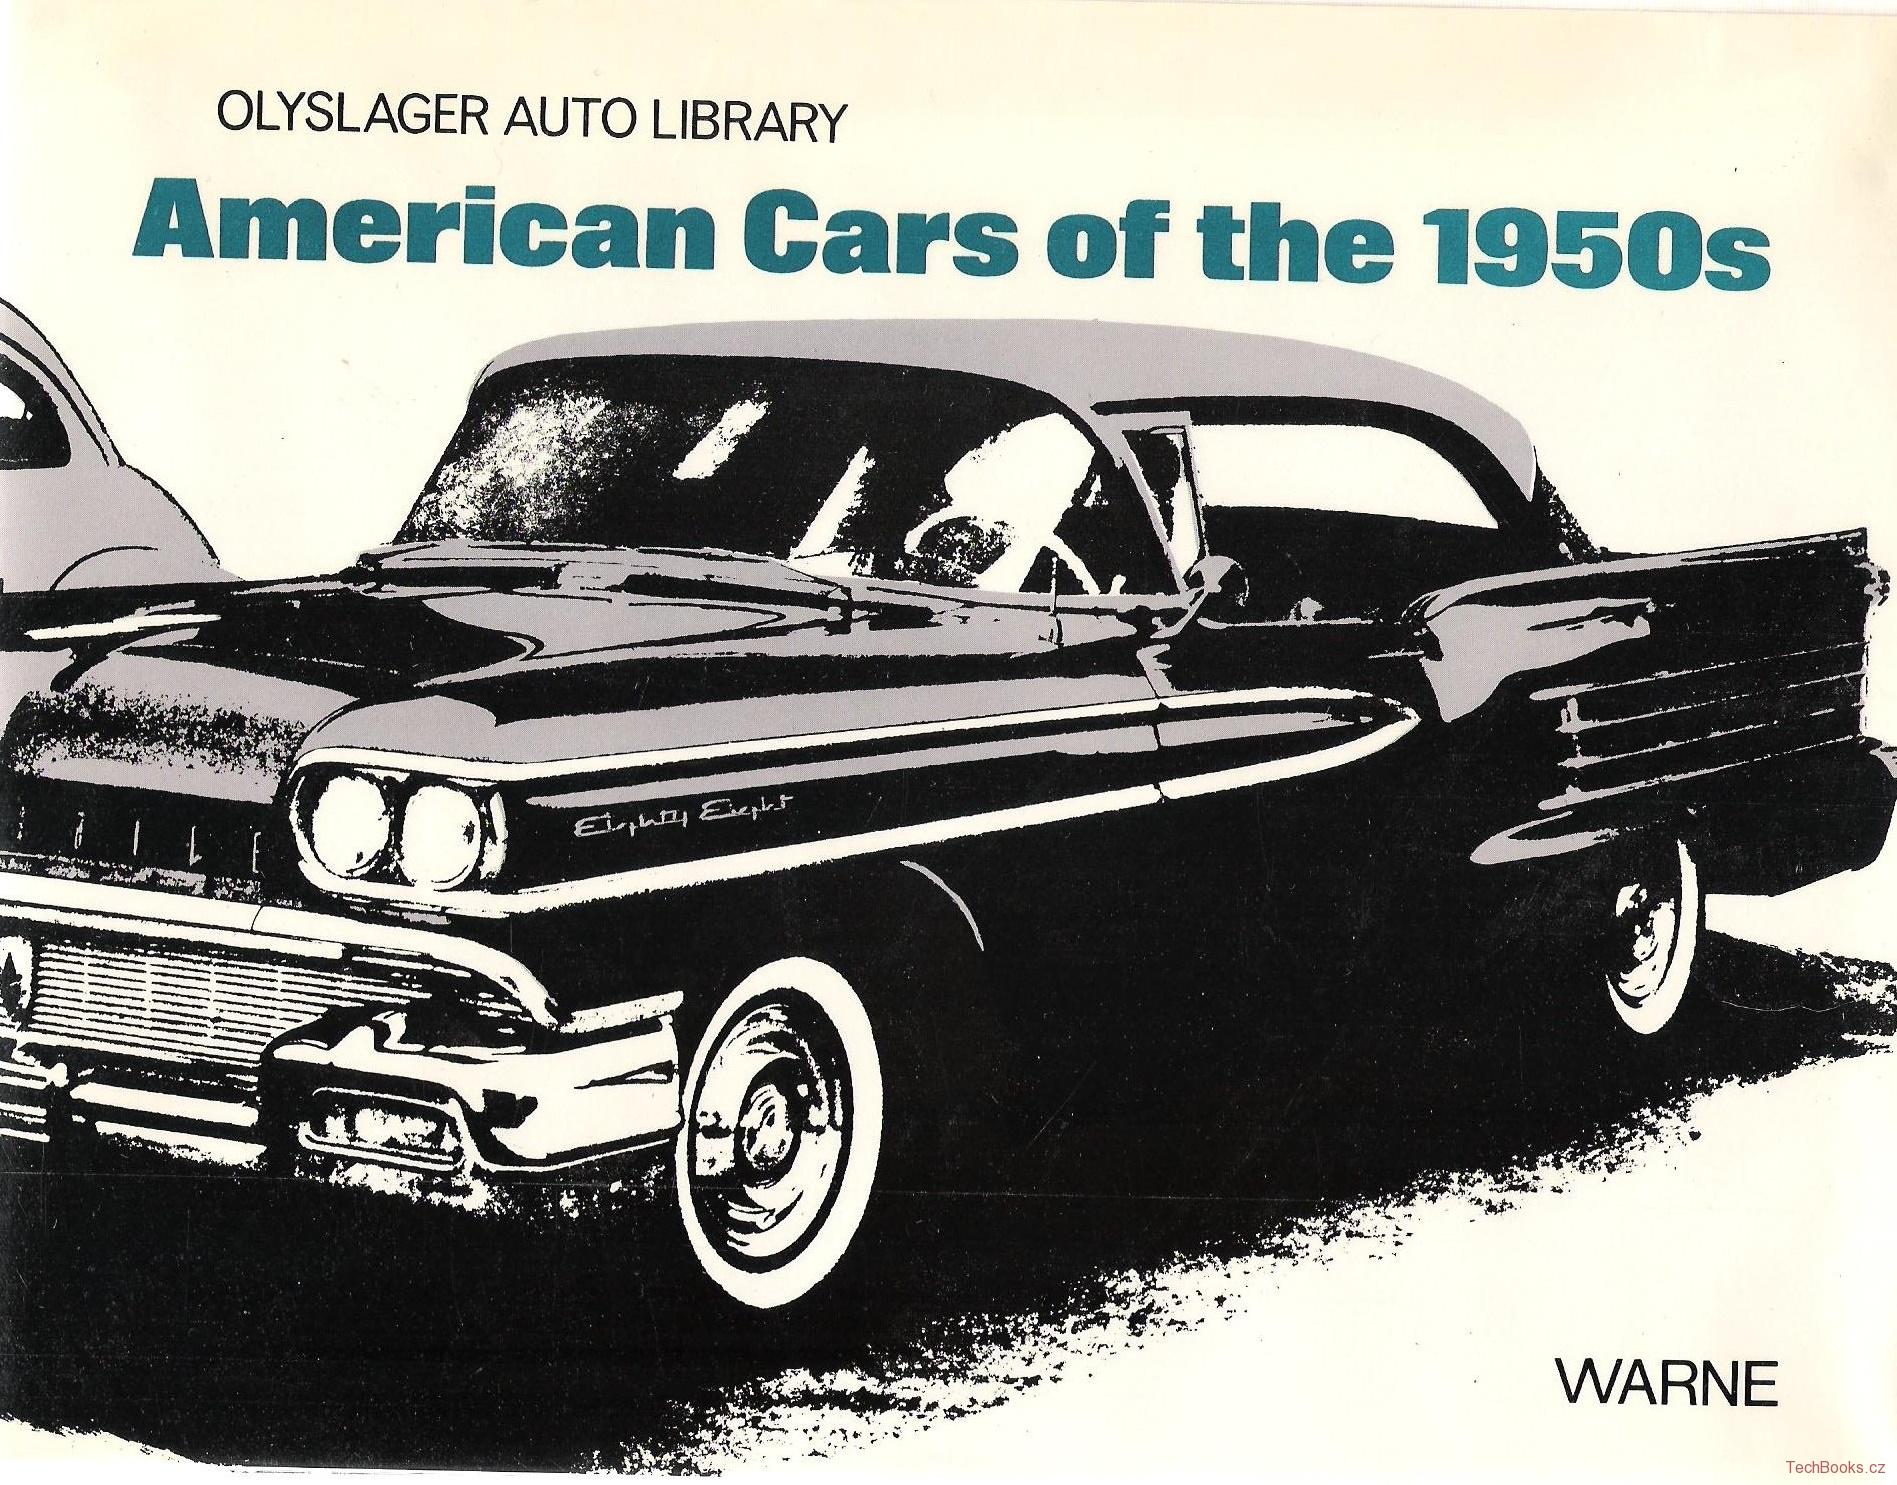 American Cars of the 1940s